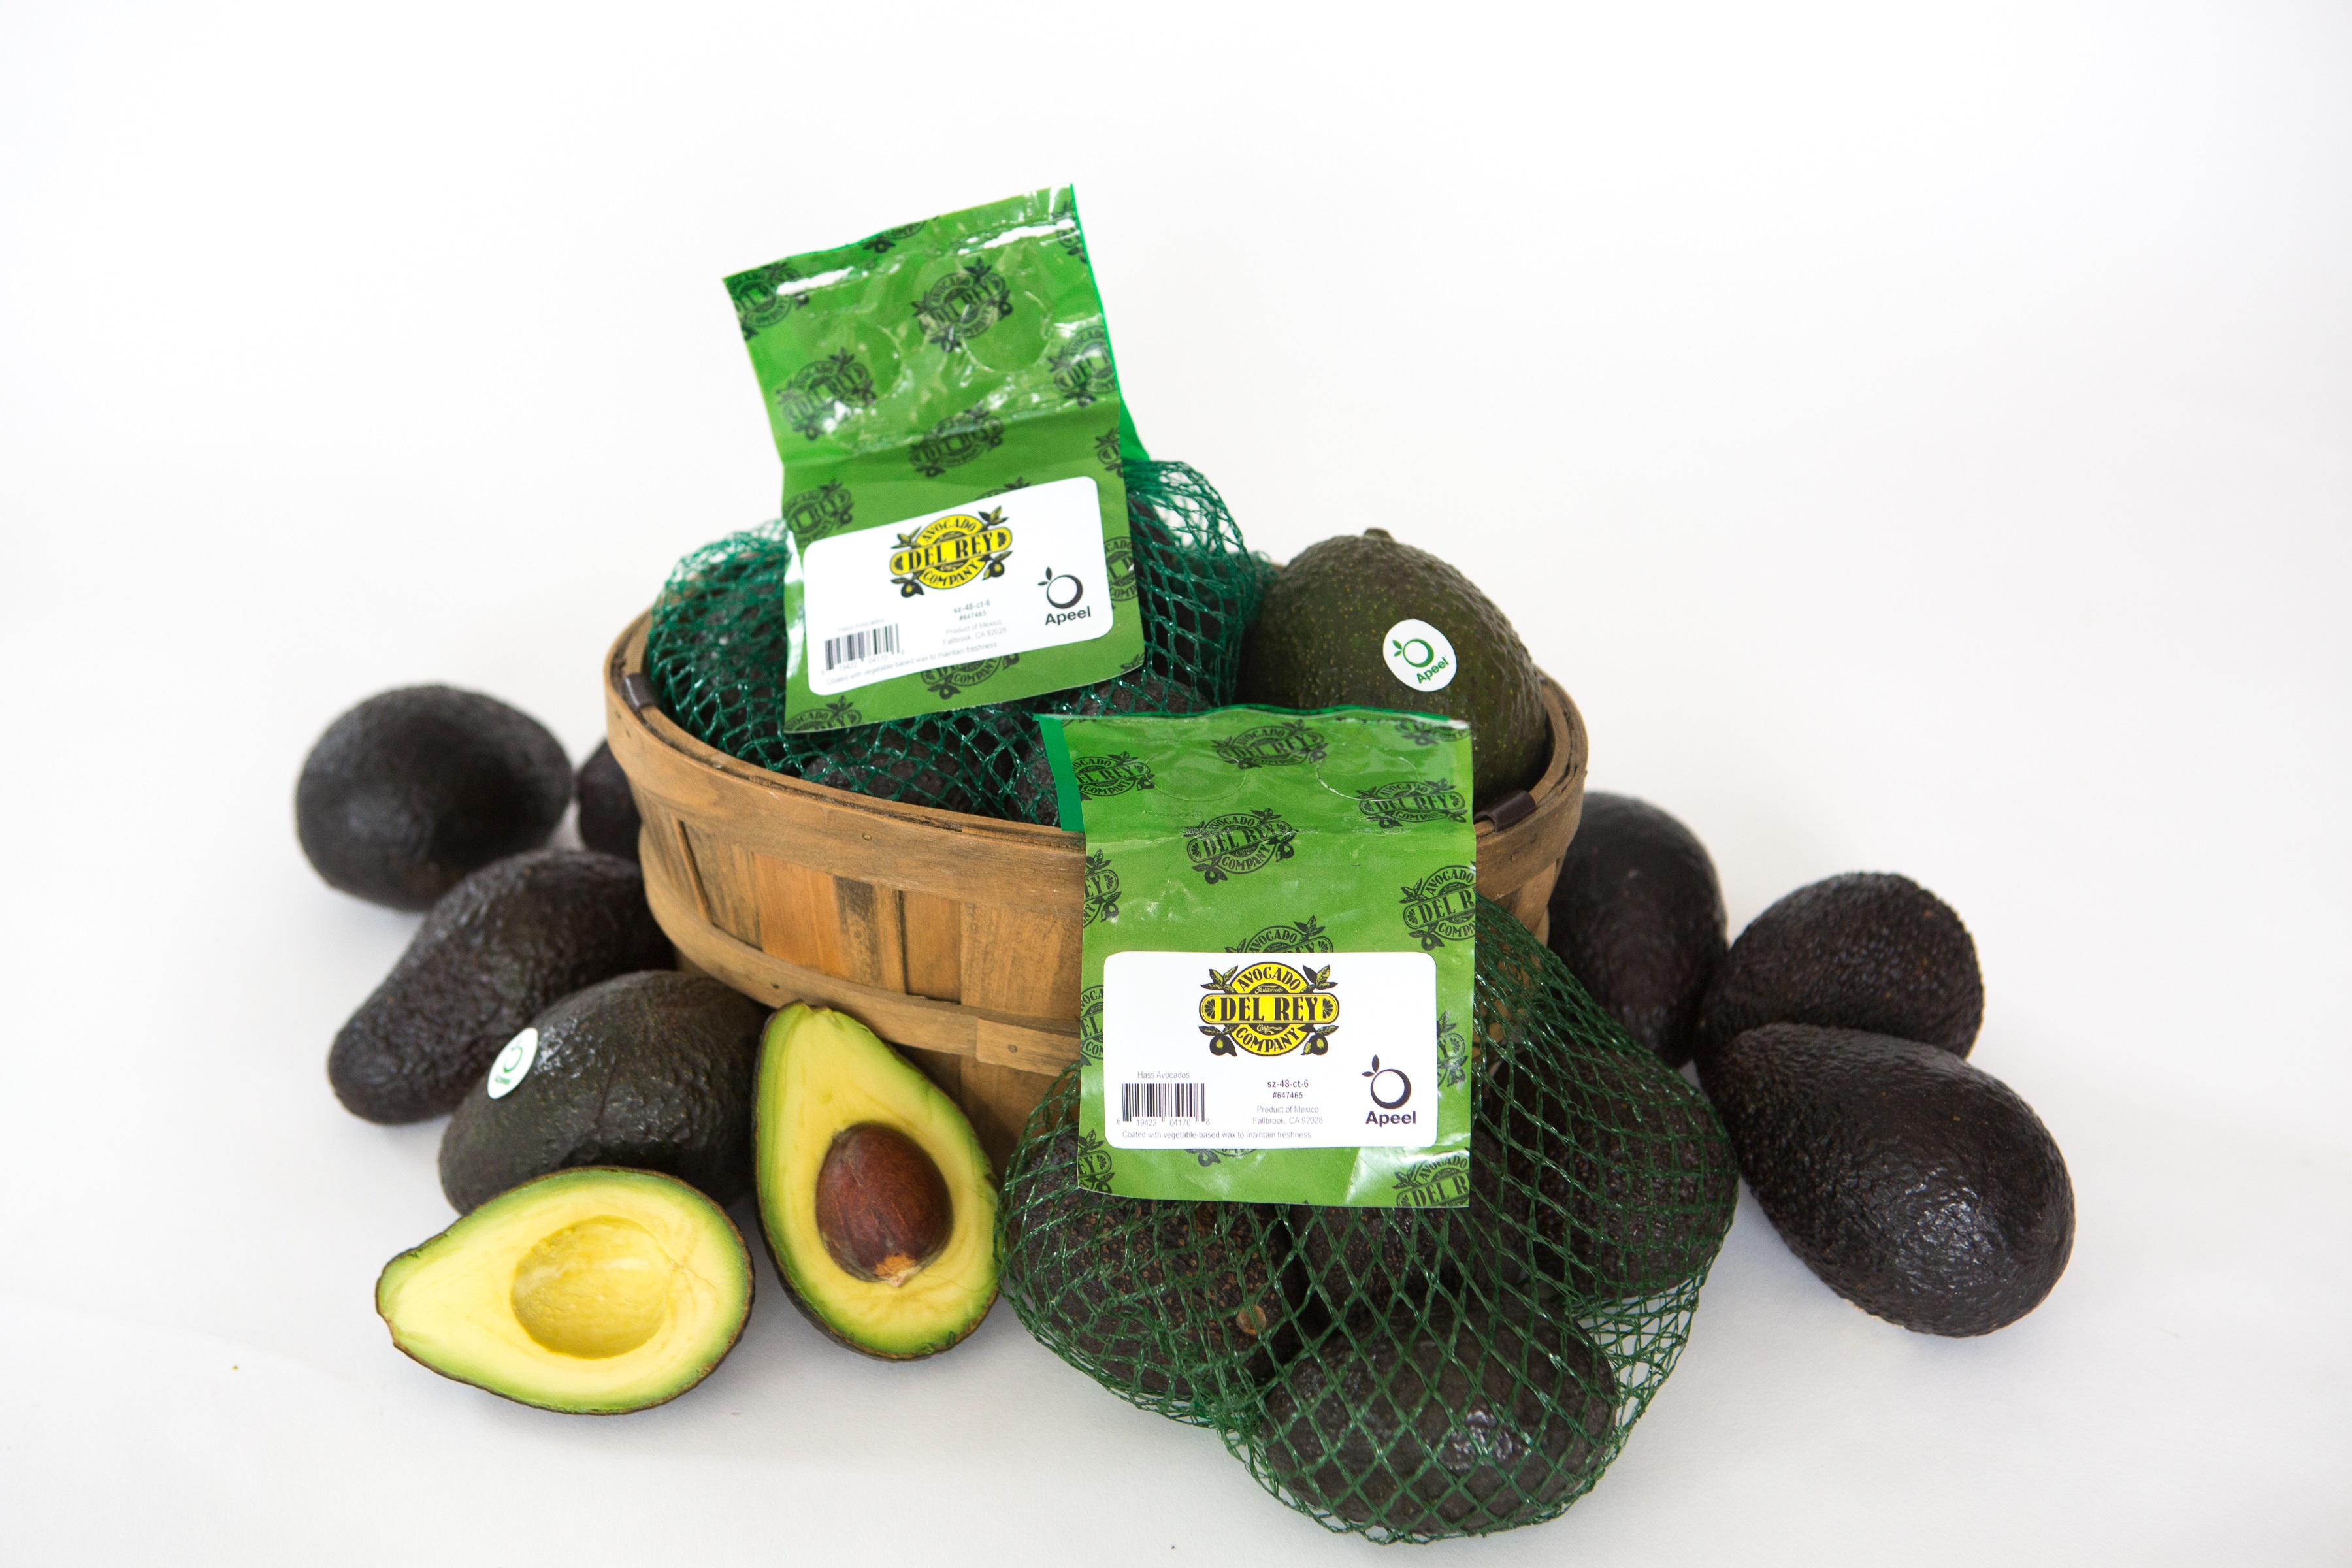 Apeel avocados with label